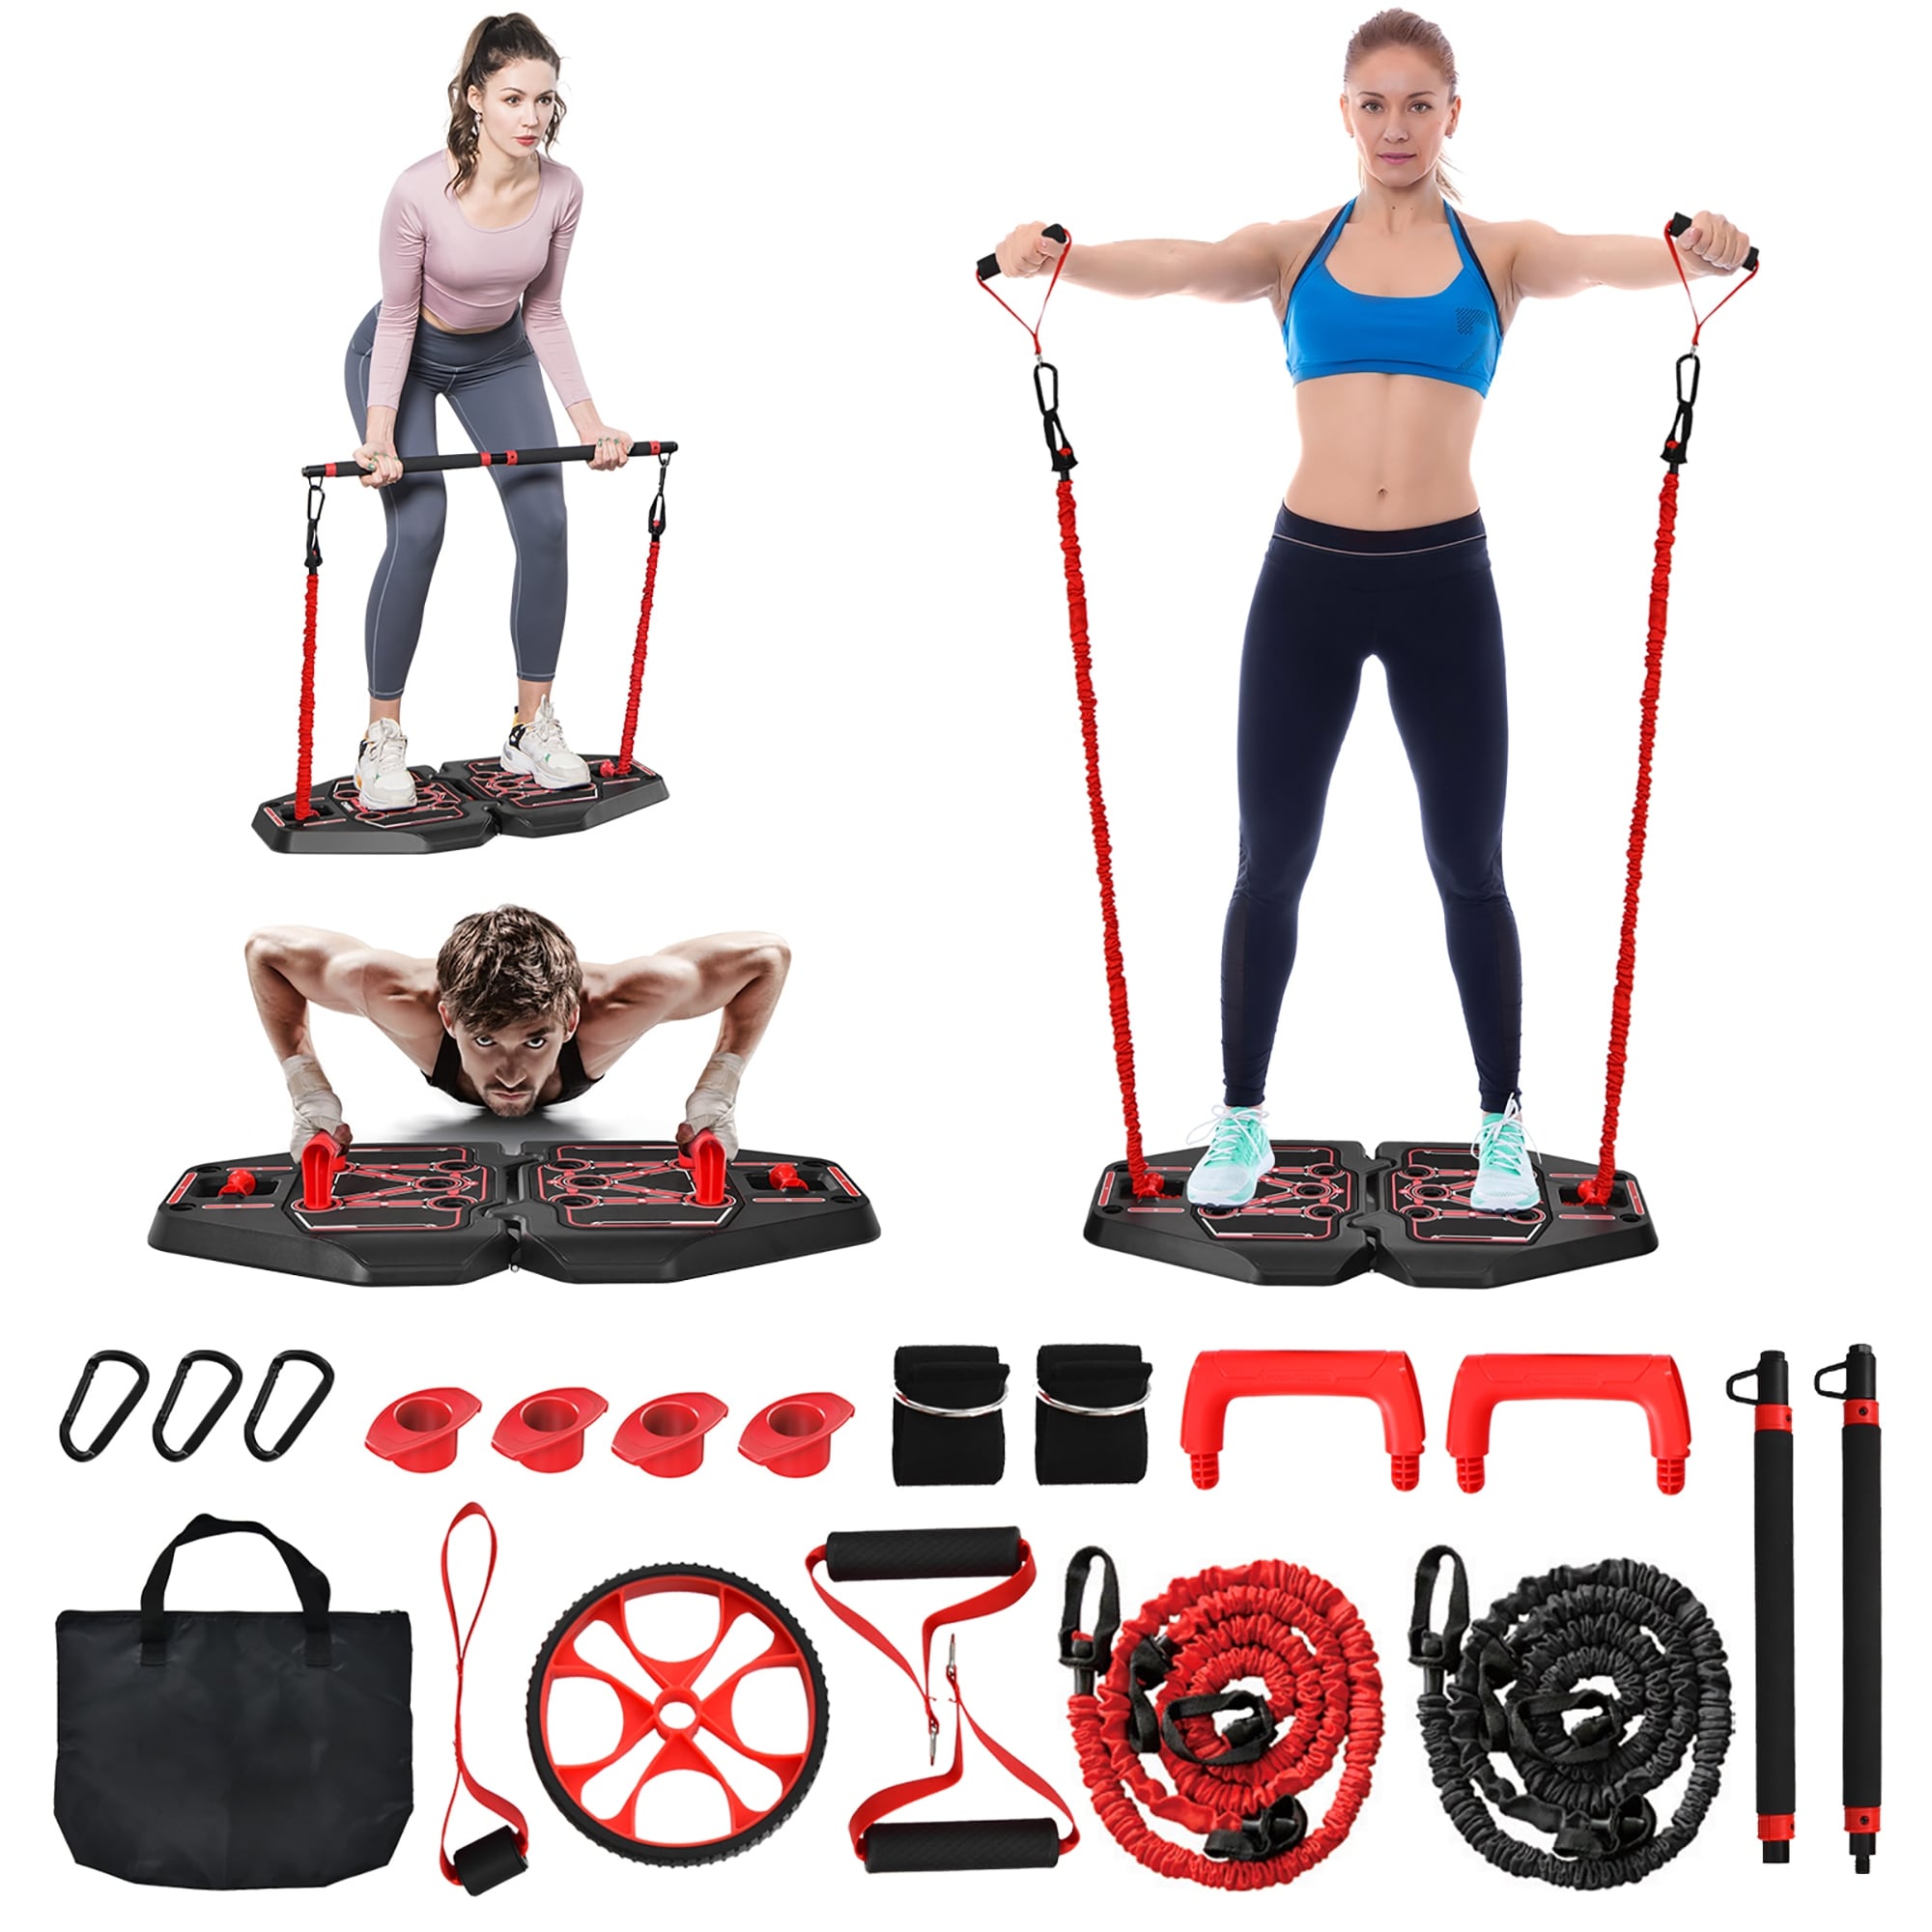 Exercise Equipment - Bed Bath & Beyond